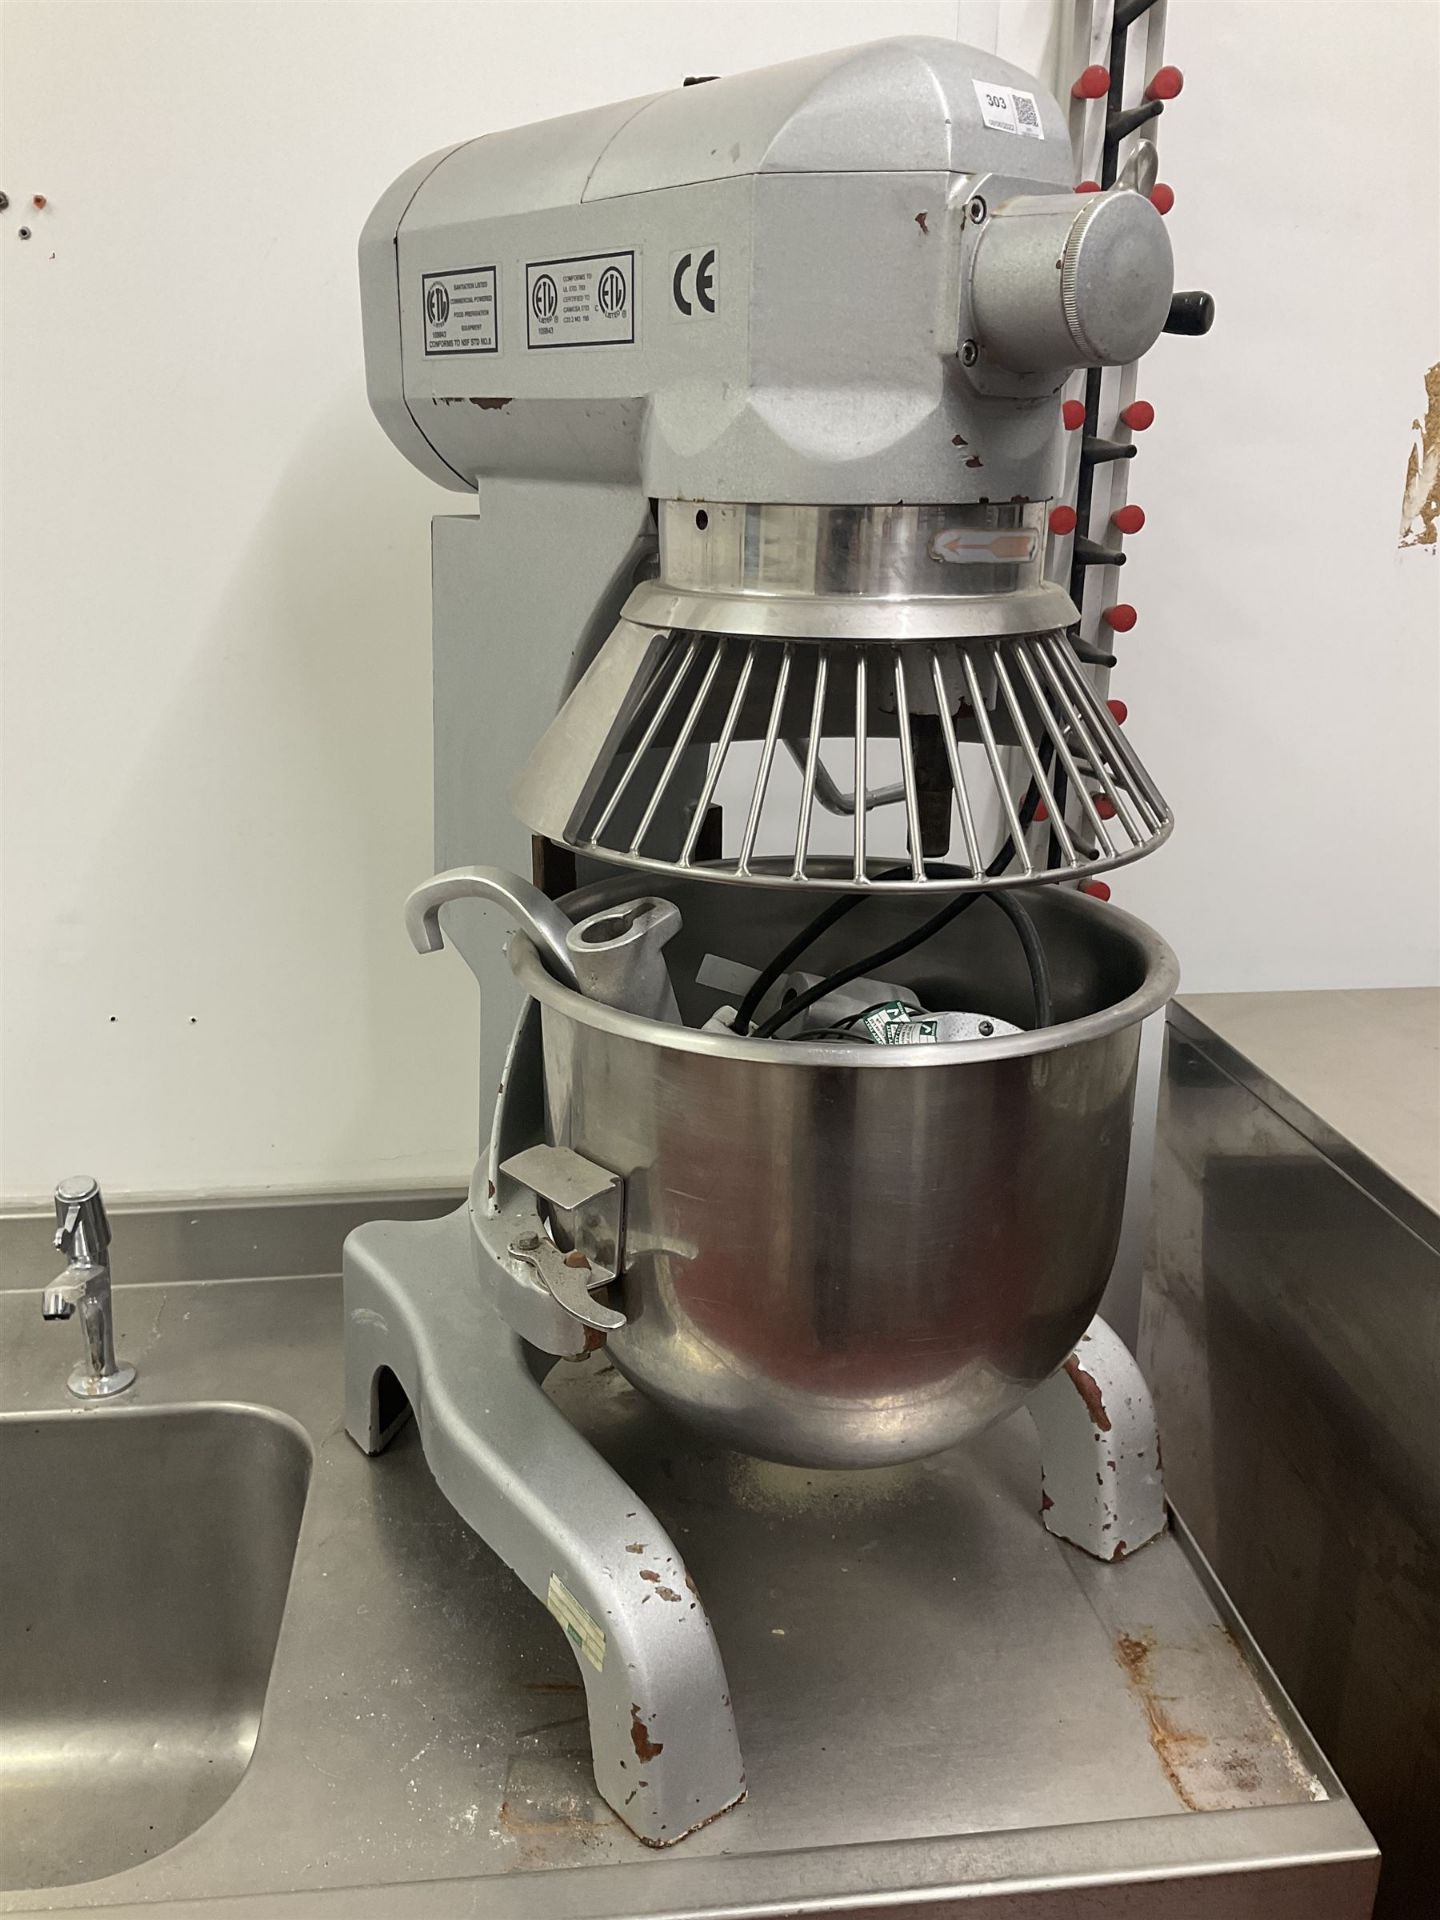 Newscan FM29 mixer with bowl and three attachments- LOT SUBJECT TO VAT ON THE HAMMER PRICE - To be c